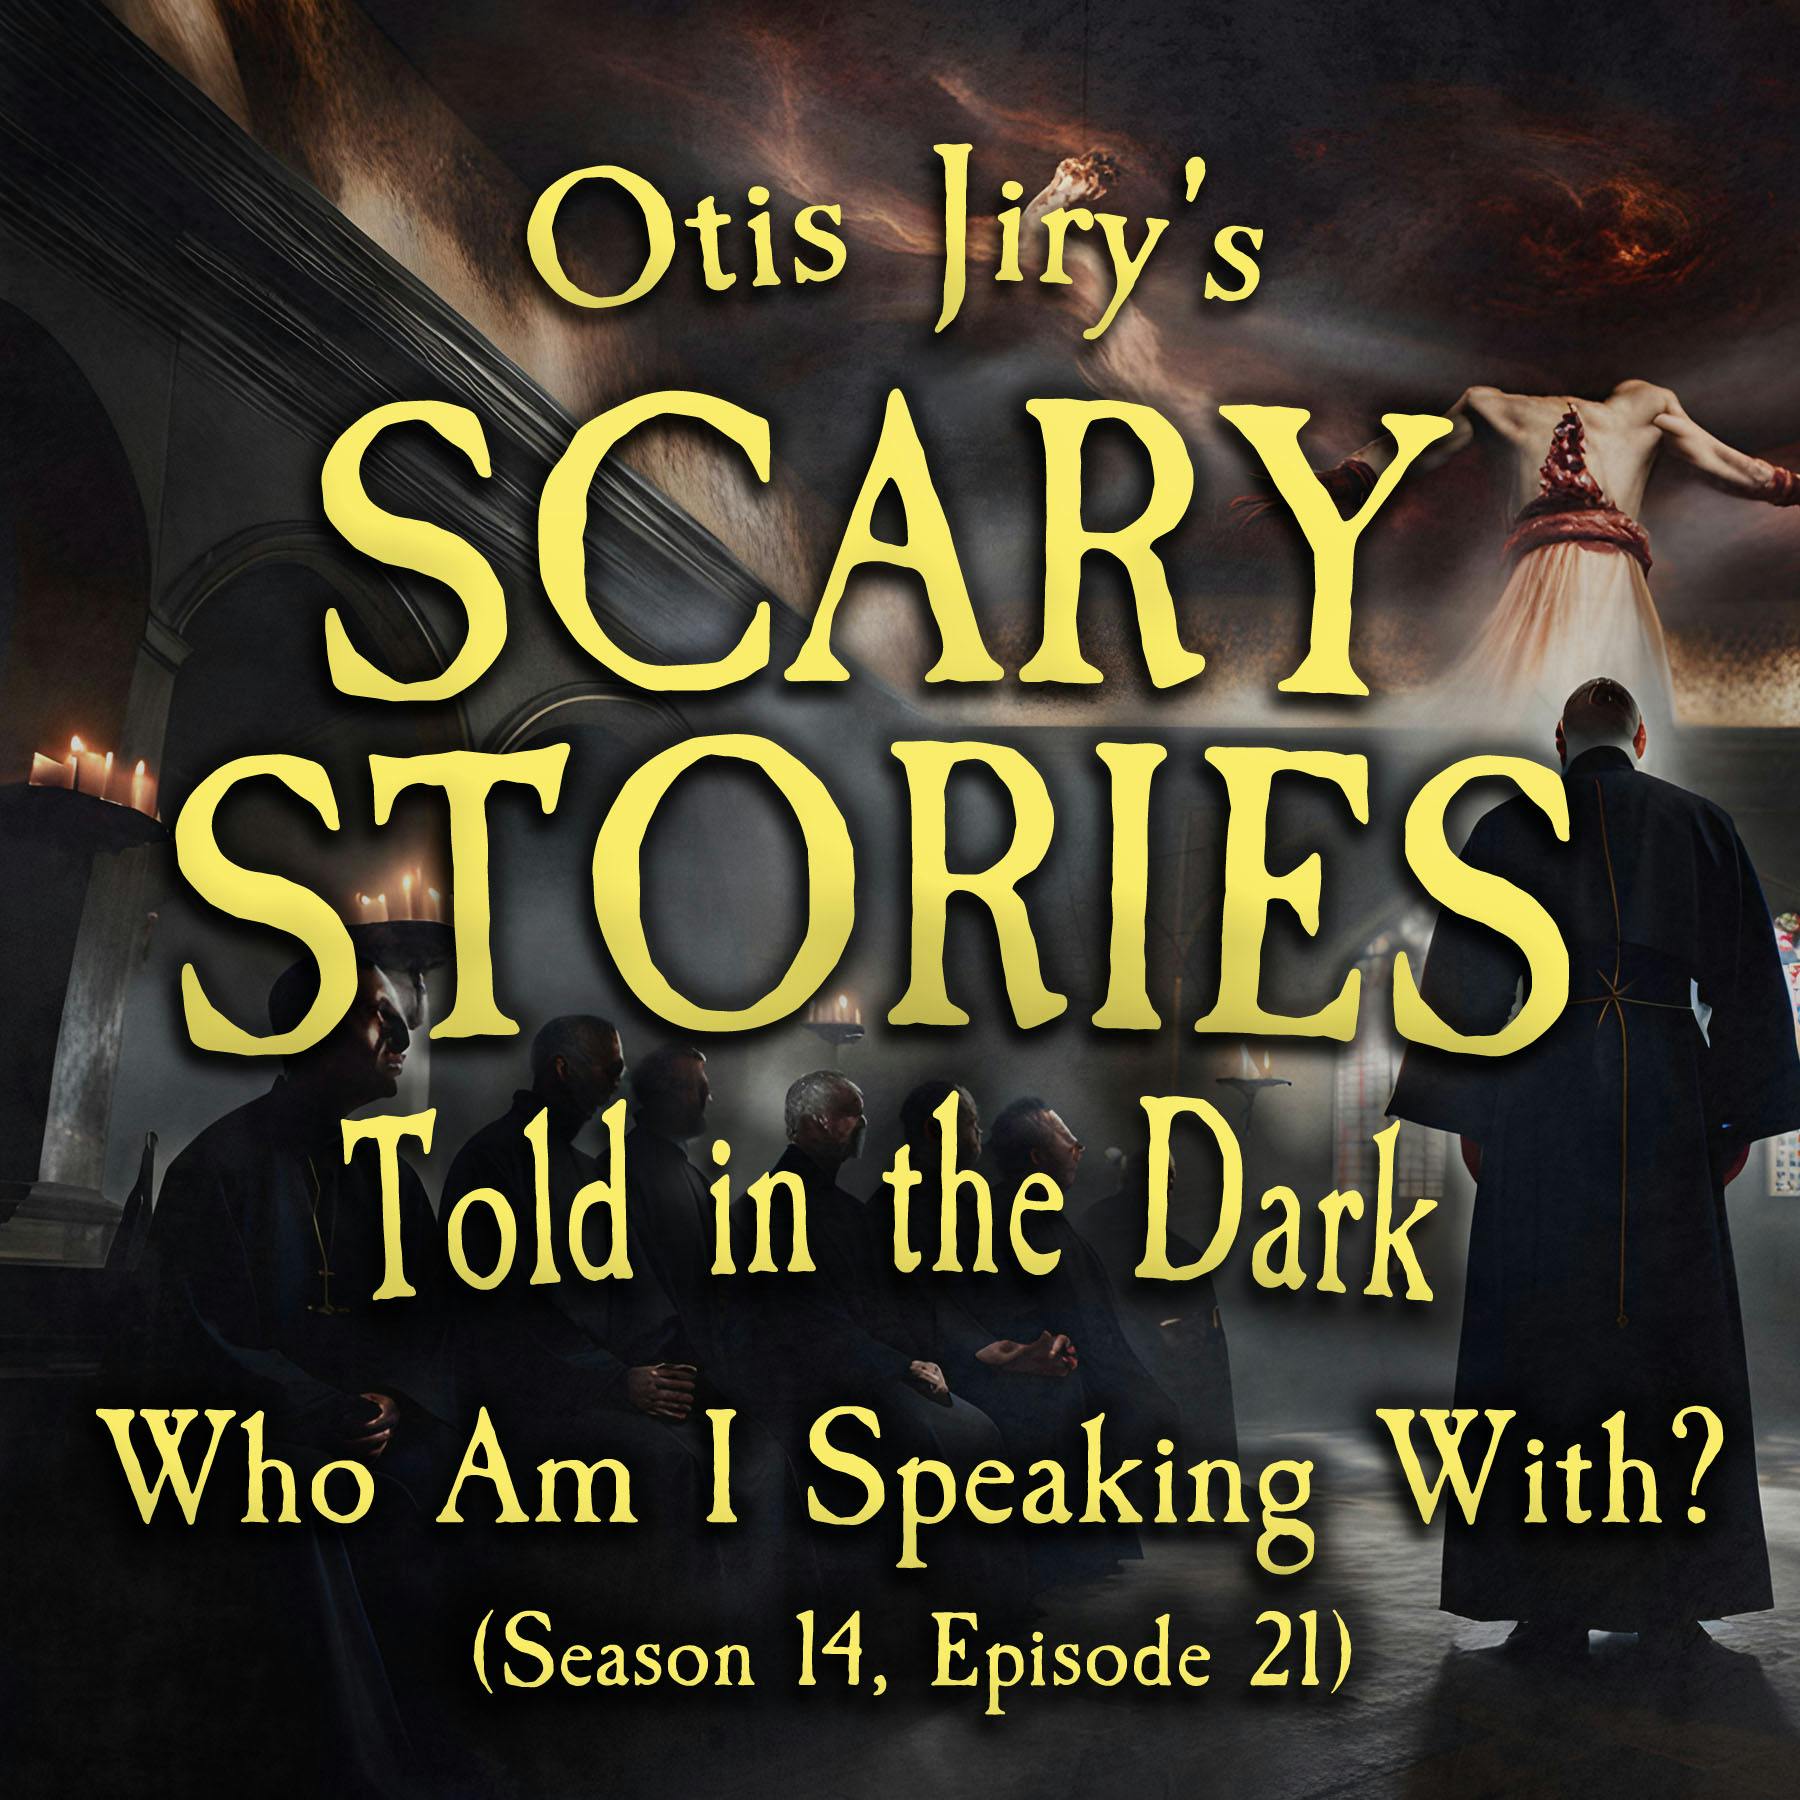 S14E21 - ”Who Am I Speaking With?” – Scary Stories Told in the Dark